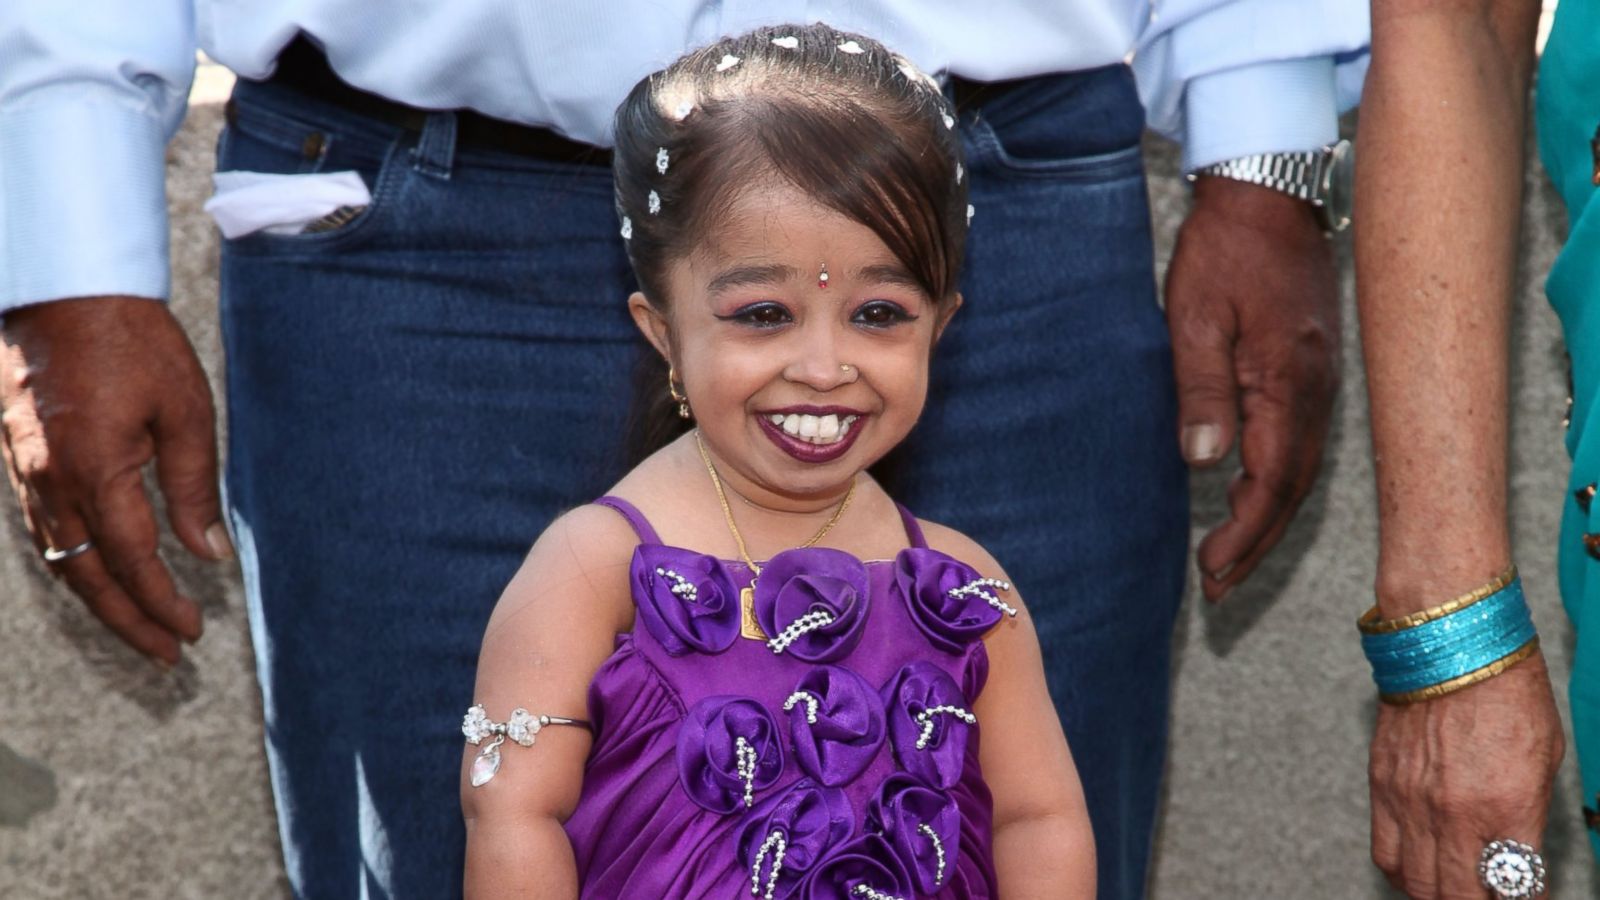 World's Smallest Woman Joins Cast of 'American Horror Story' - ABC